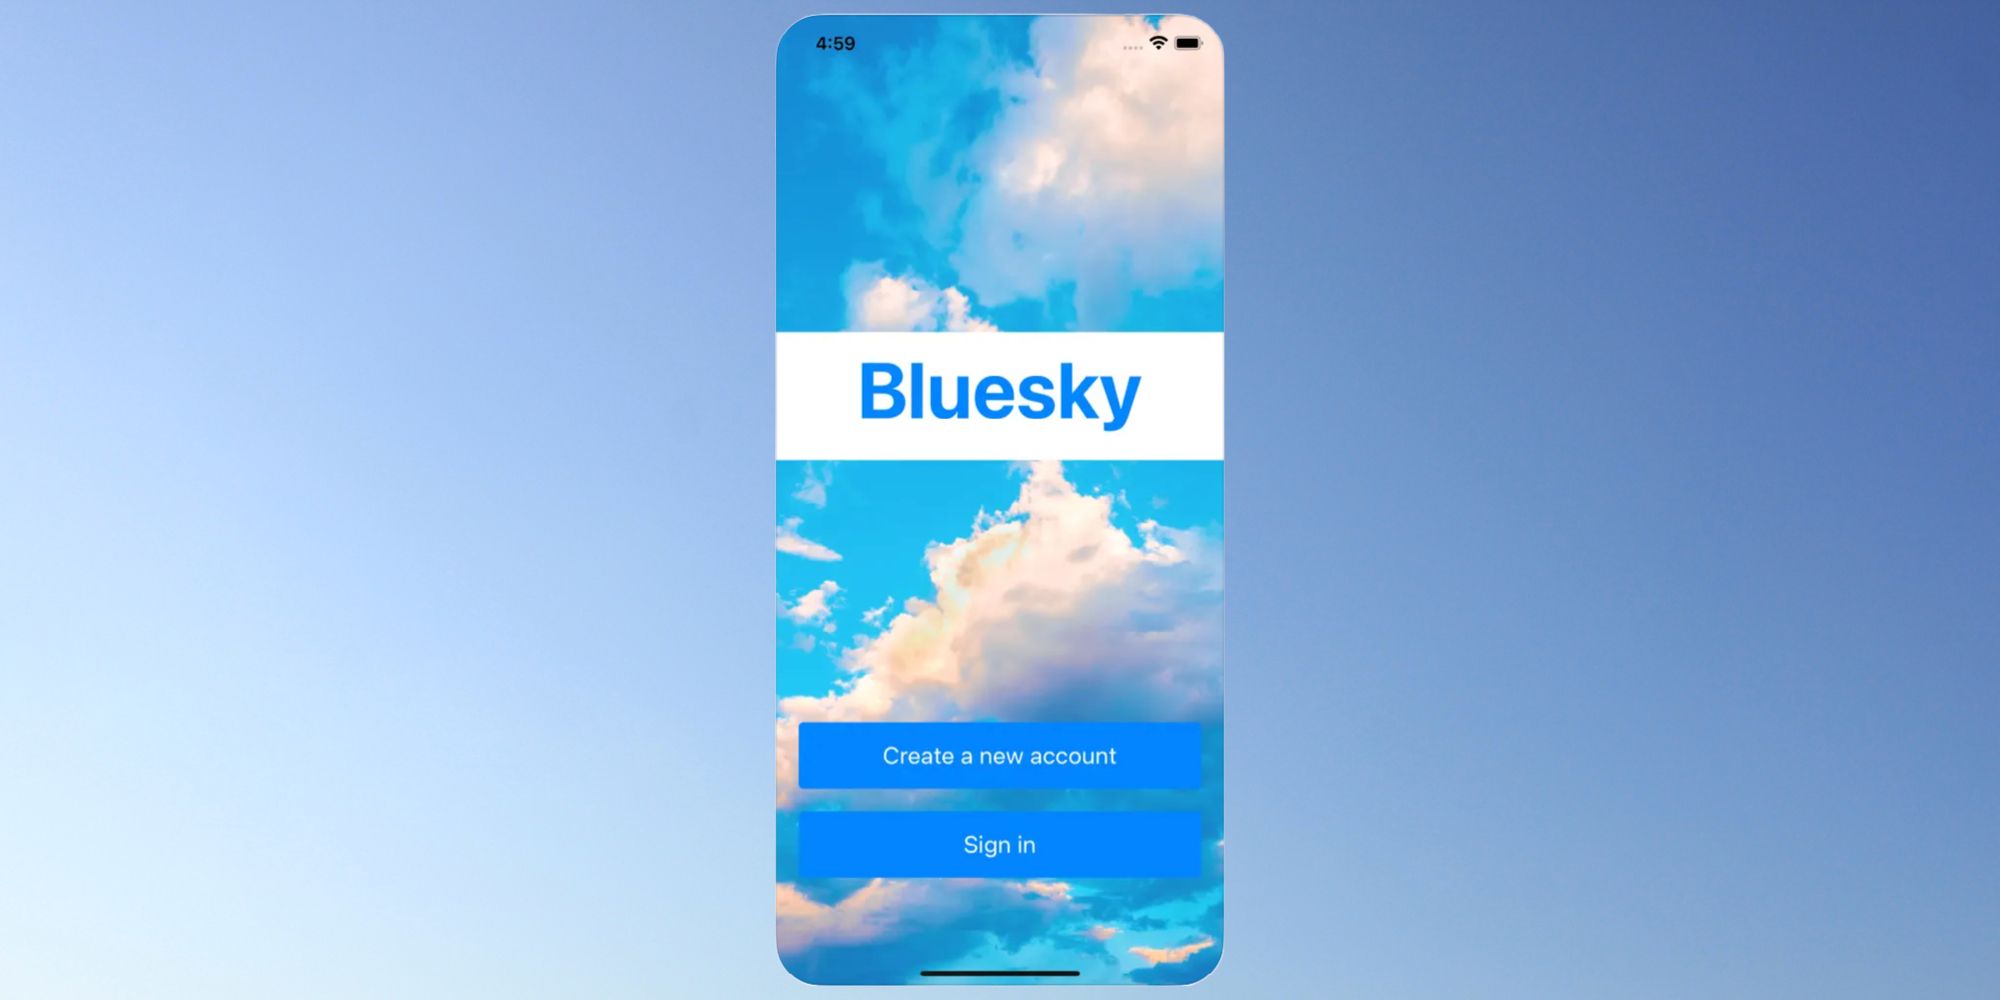 An iPhone screenshot showing the landing page for Bluesky